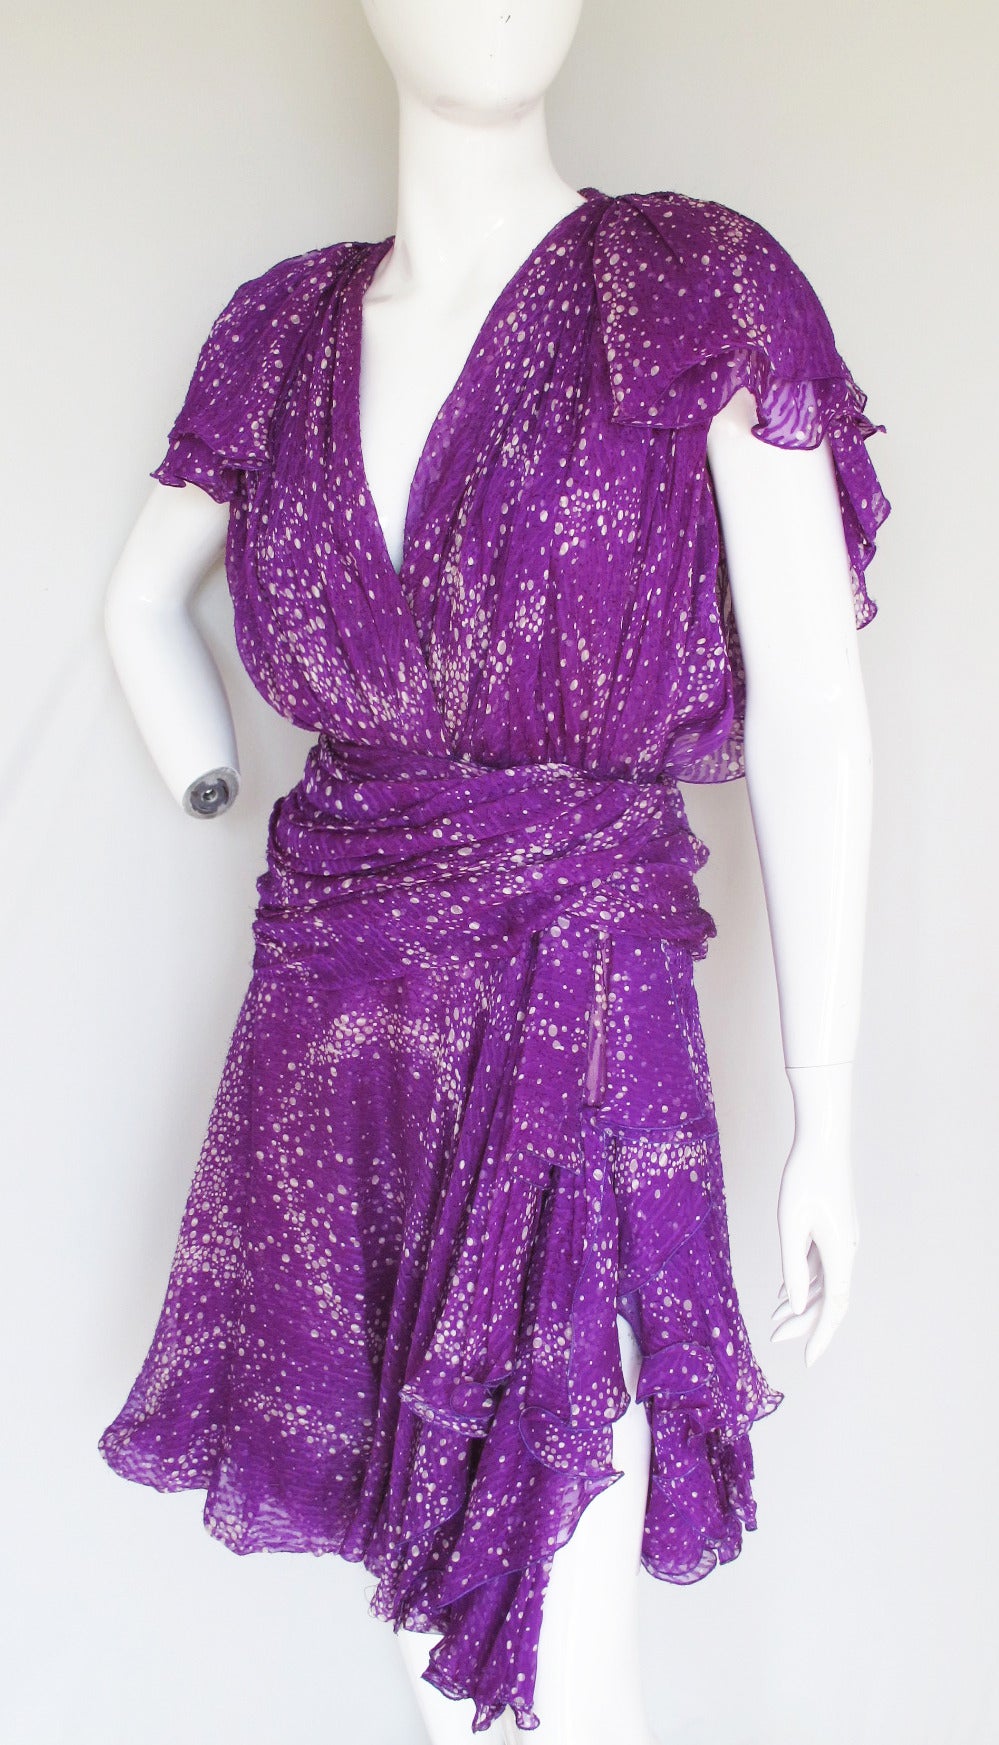 A Jacqueline de Ribes multi-layered silk chiffon cocktail dress with plunge neckline, flounced sleeves, tiered side slit and bright purple chiffon fabric printed with a pattern of swirling gray and white circles. The bodice front is made from a